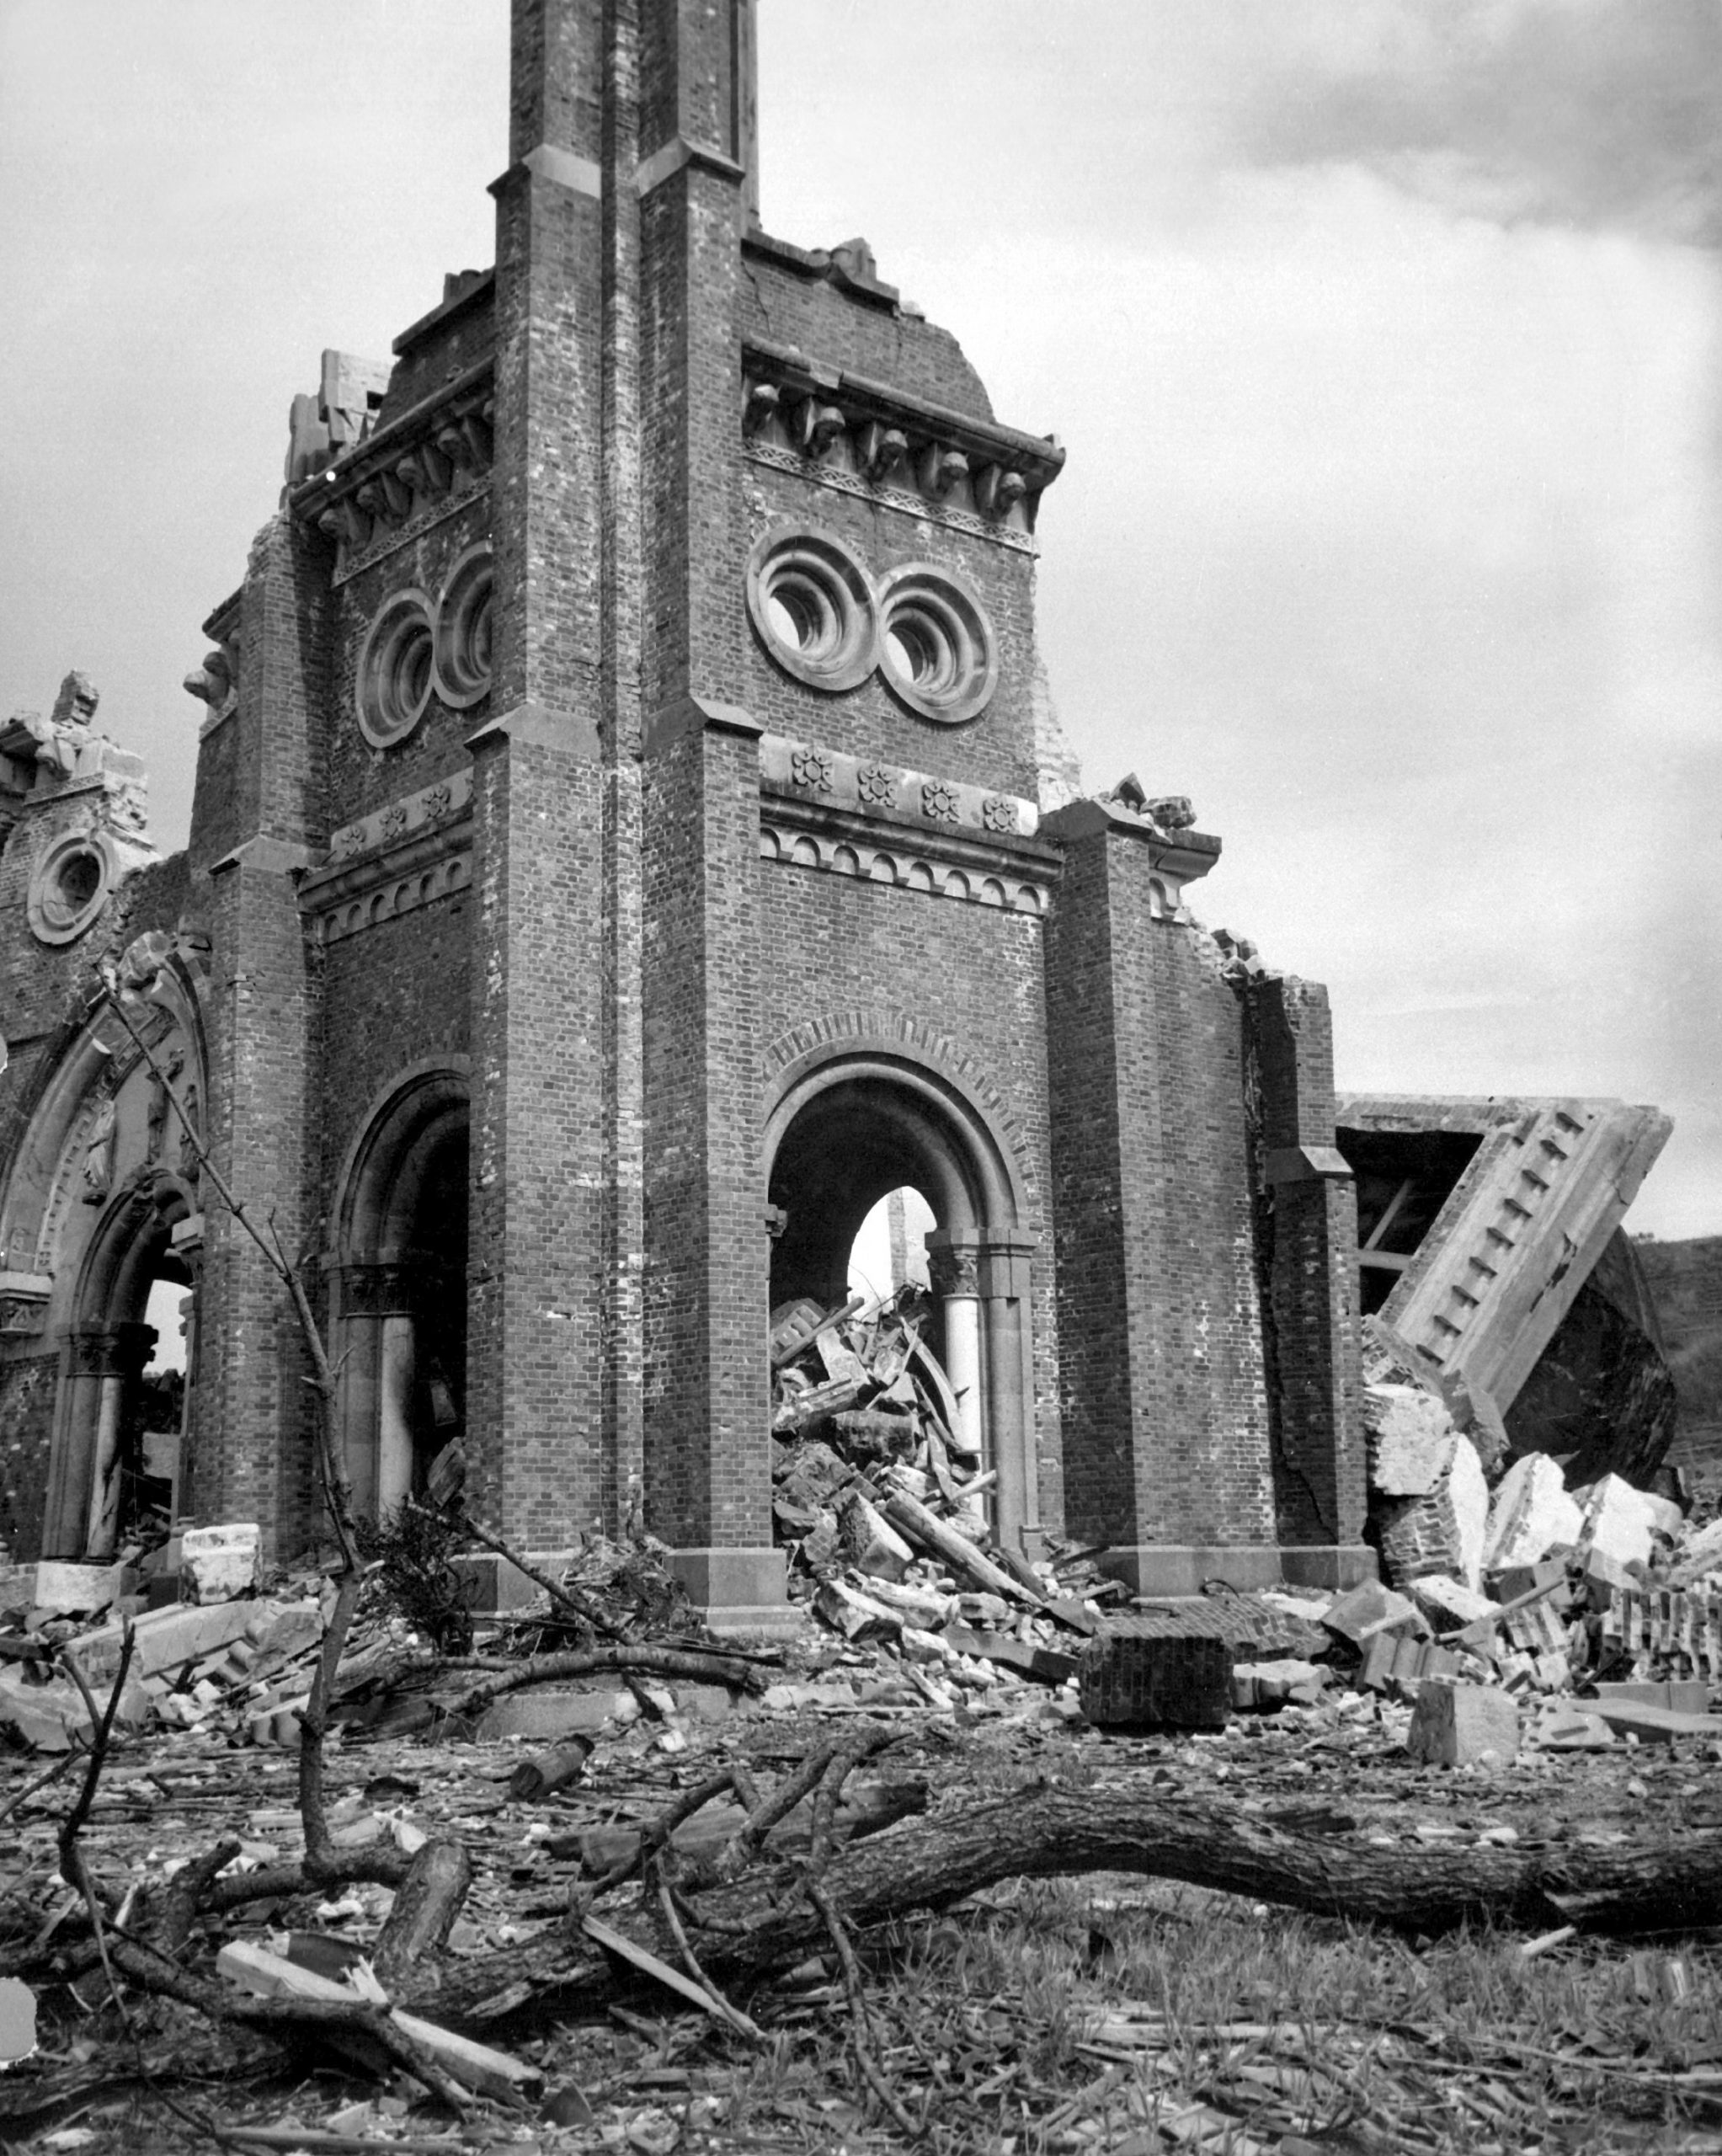 A cathedral in Nagasaki after the bombing.